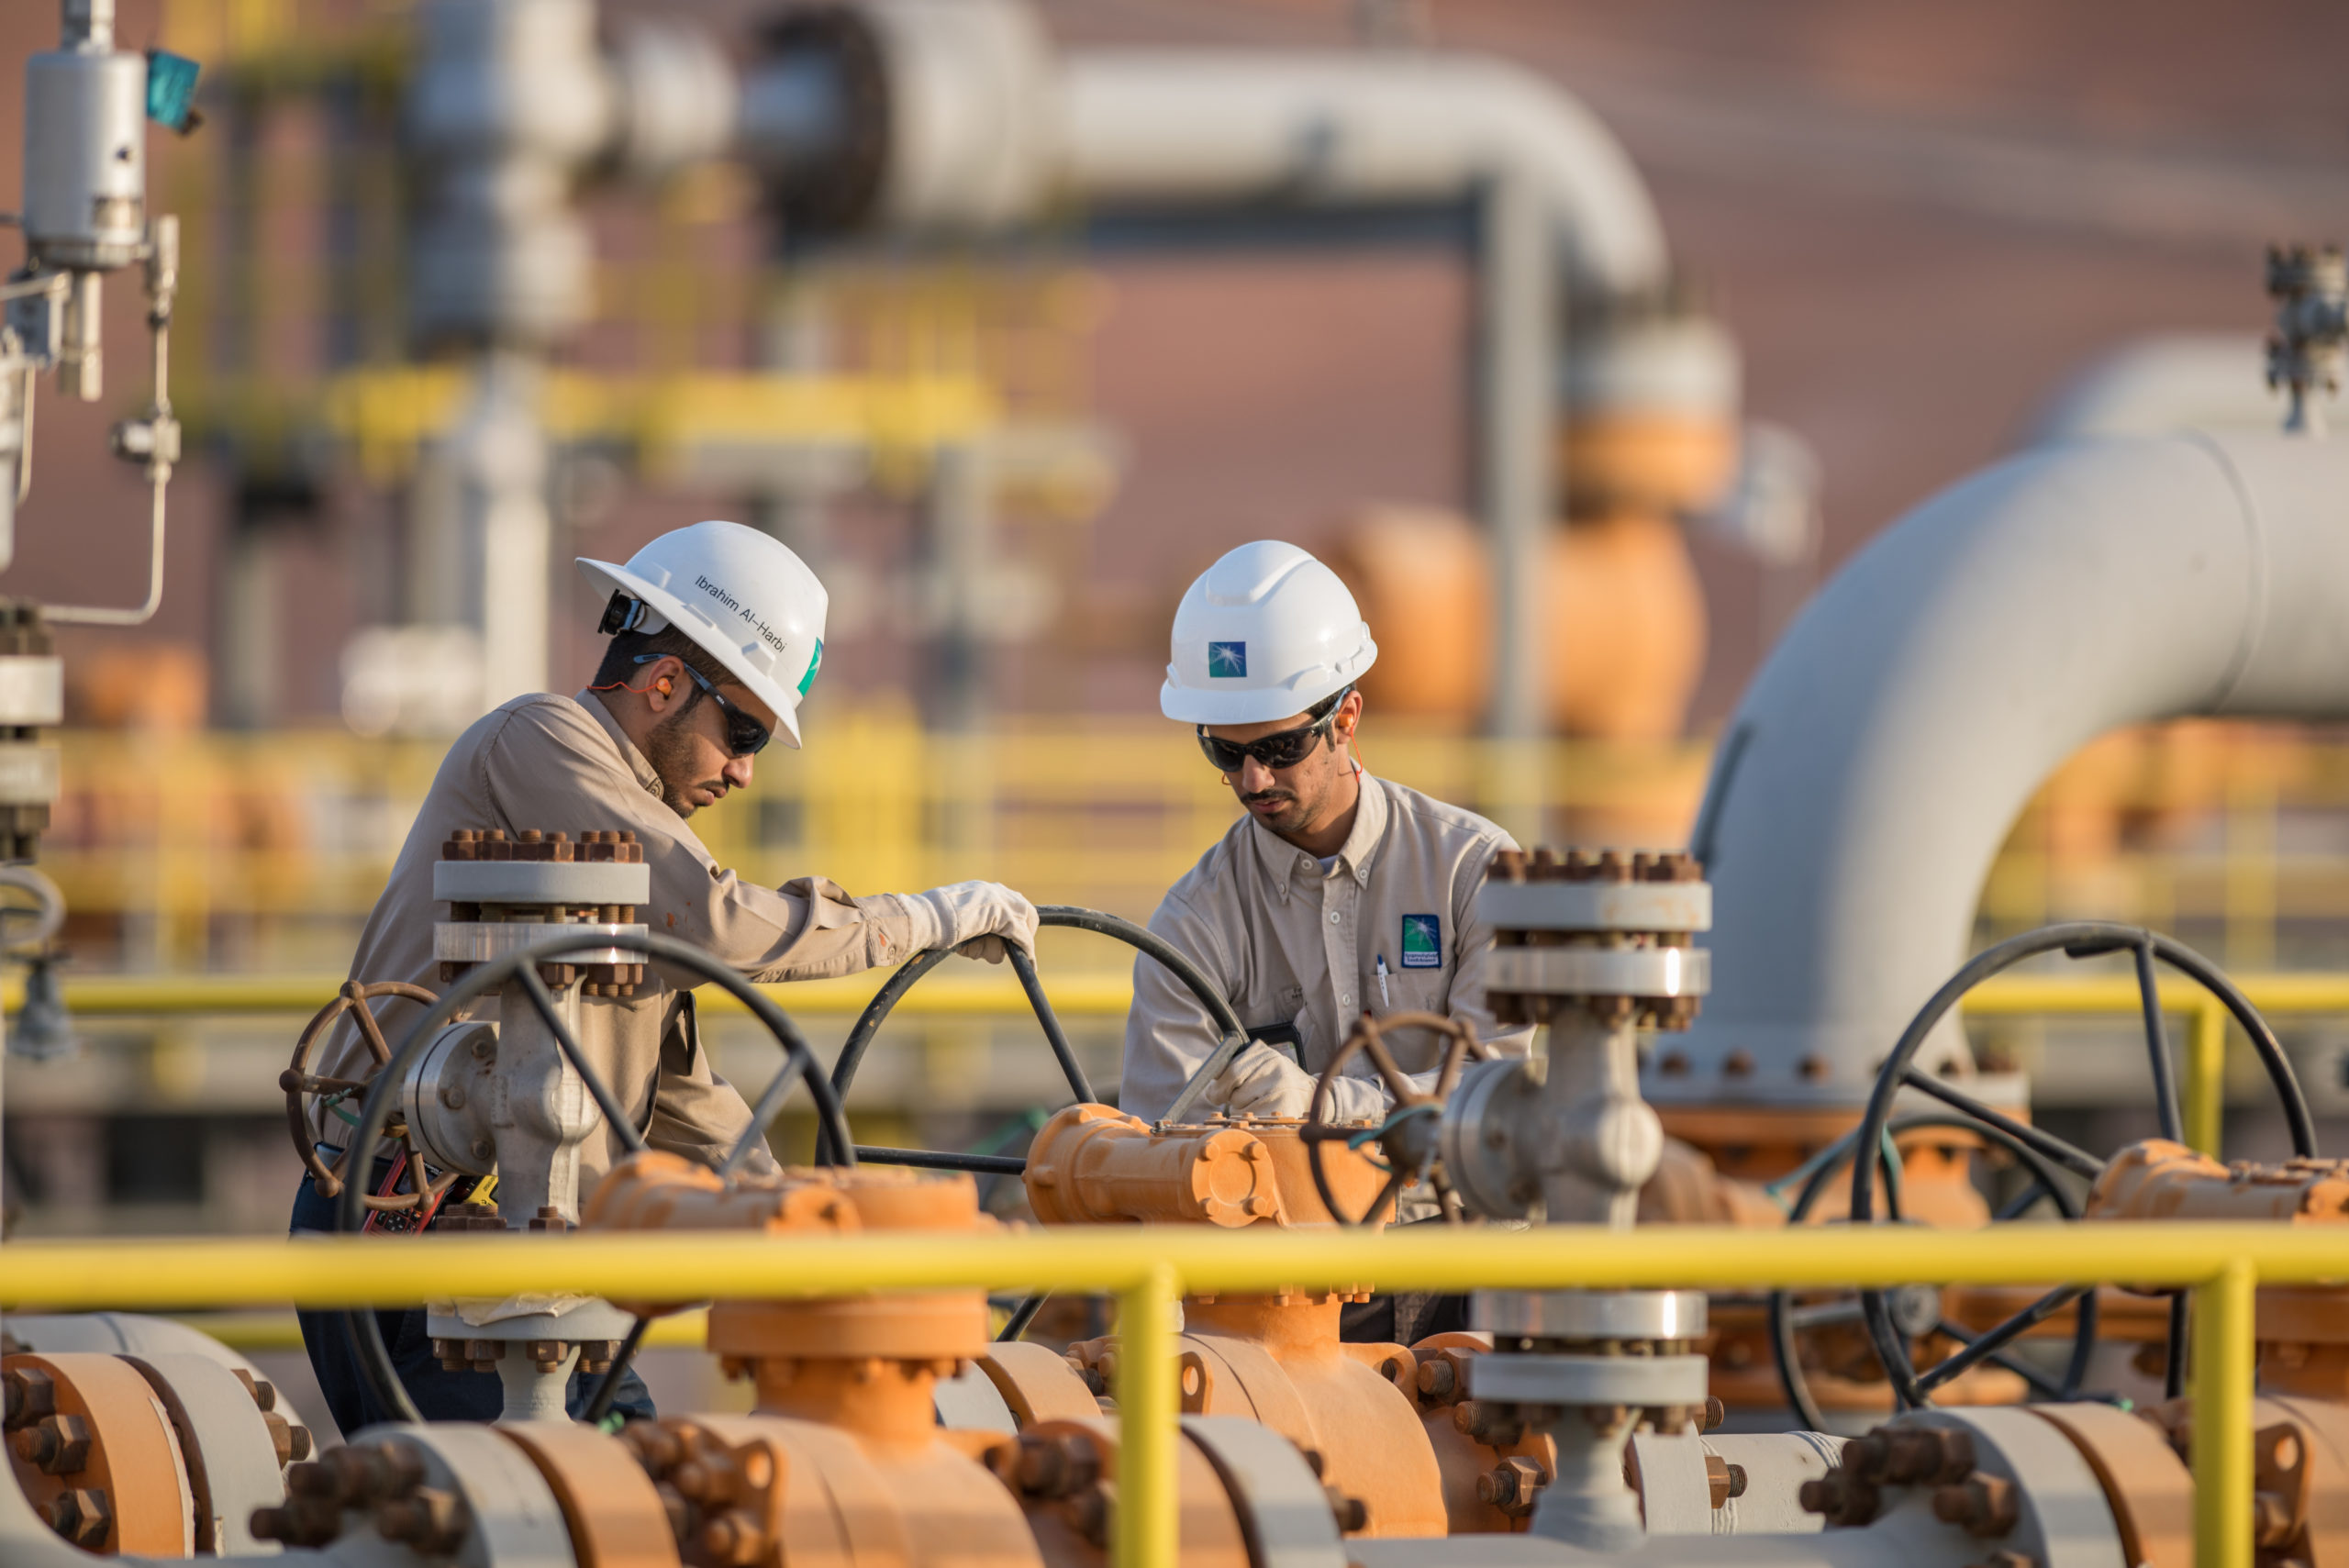 Aramco is cutting back its oil production investment programme